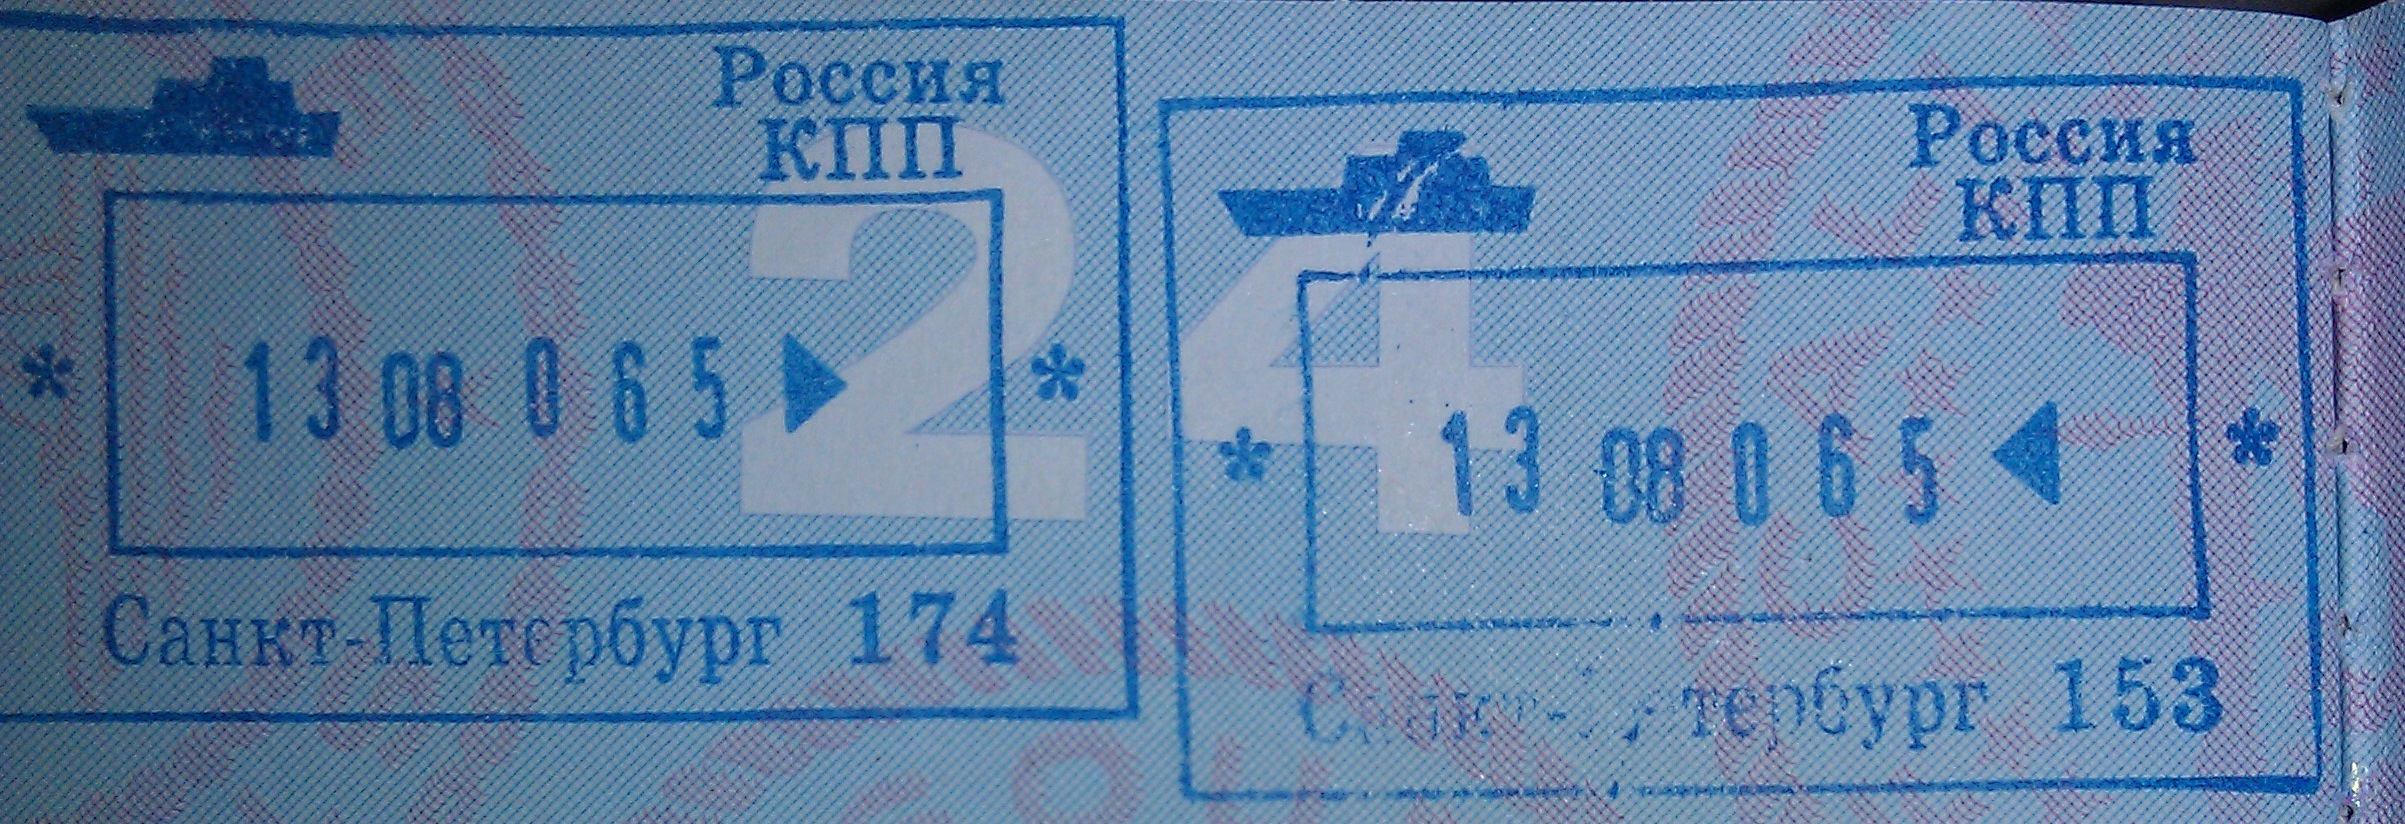 Russian Citizens Date Of 57